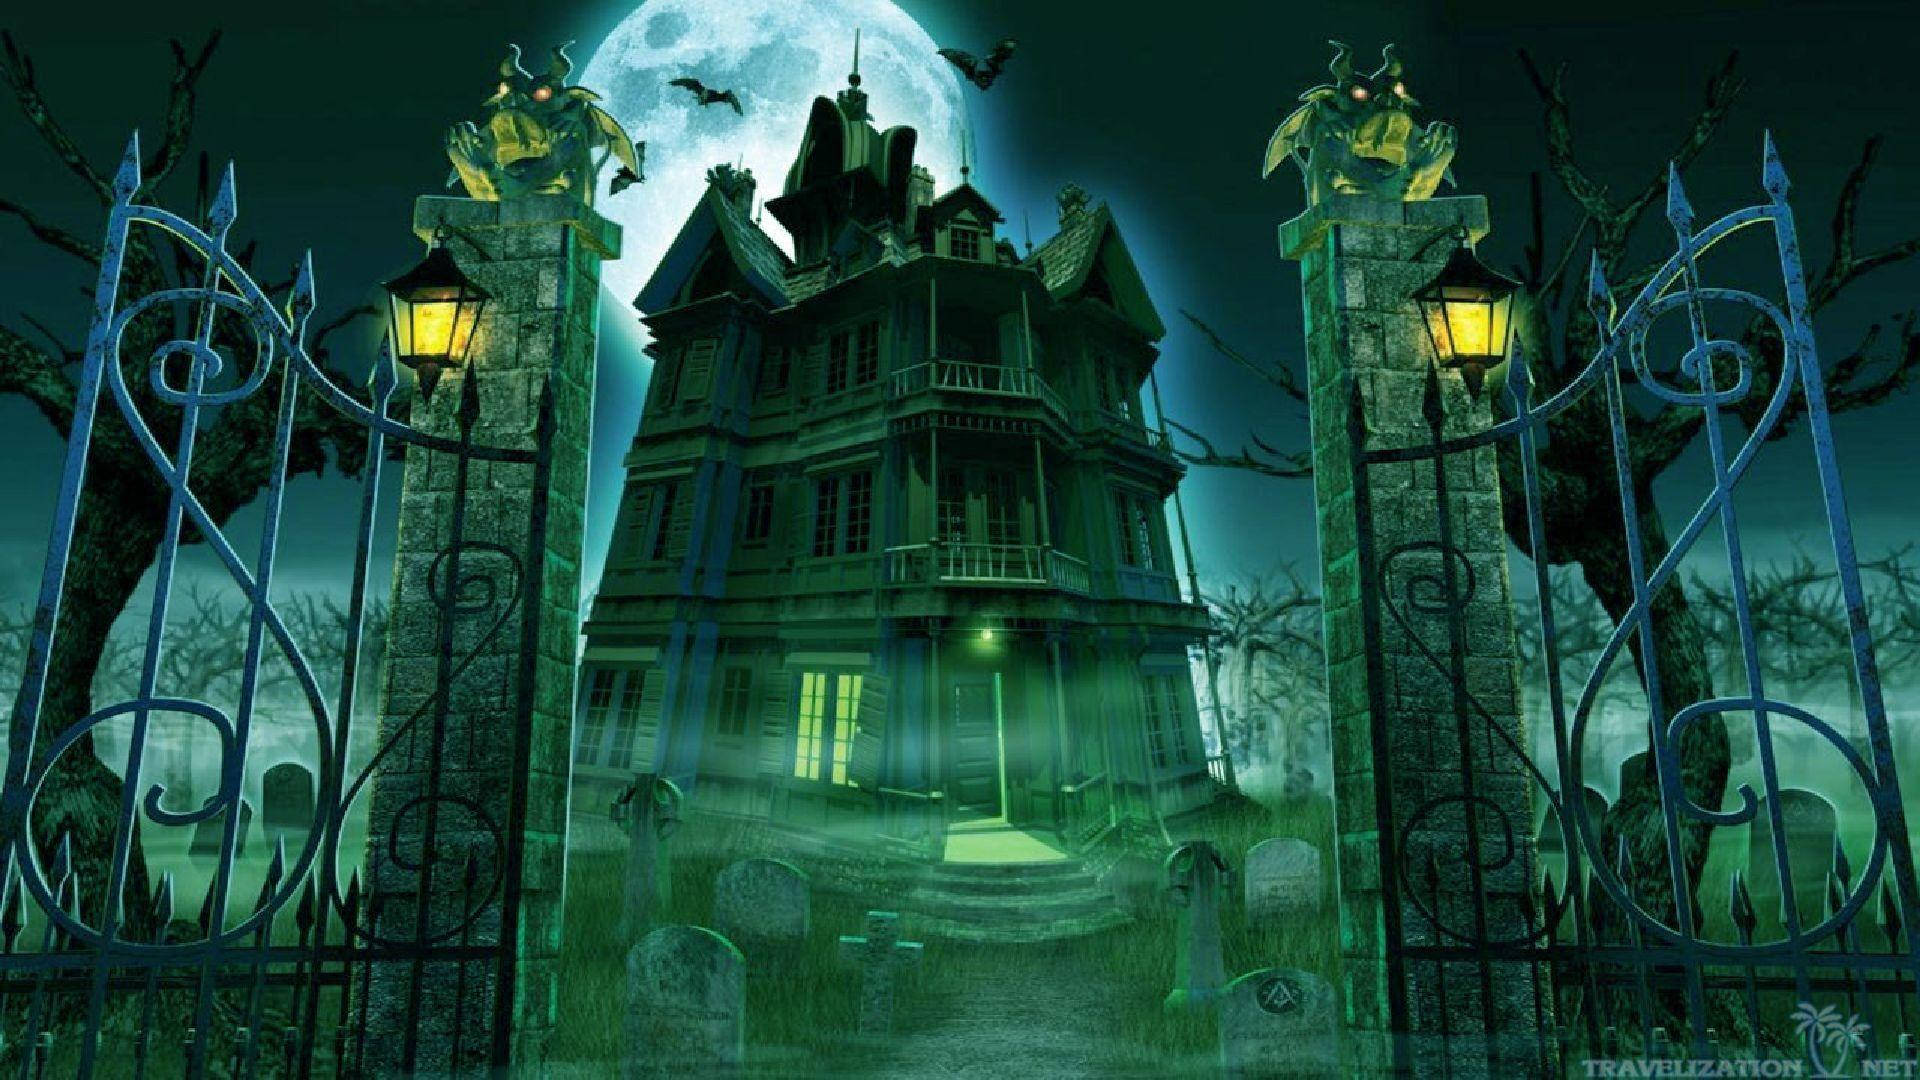 Get ready to journey through the spooky Haunted House this Halloween Wallpaper